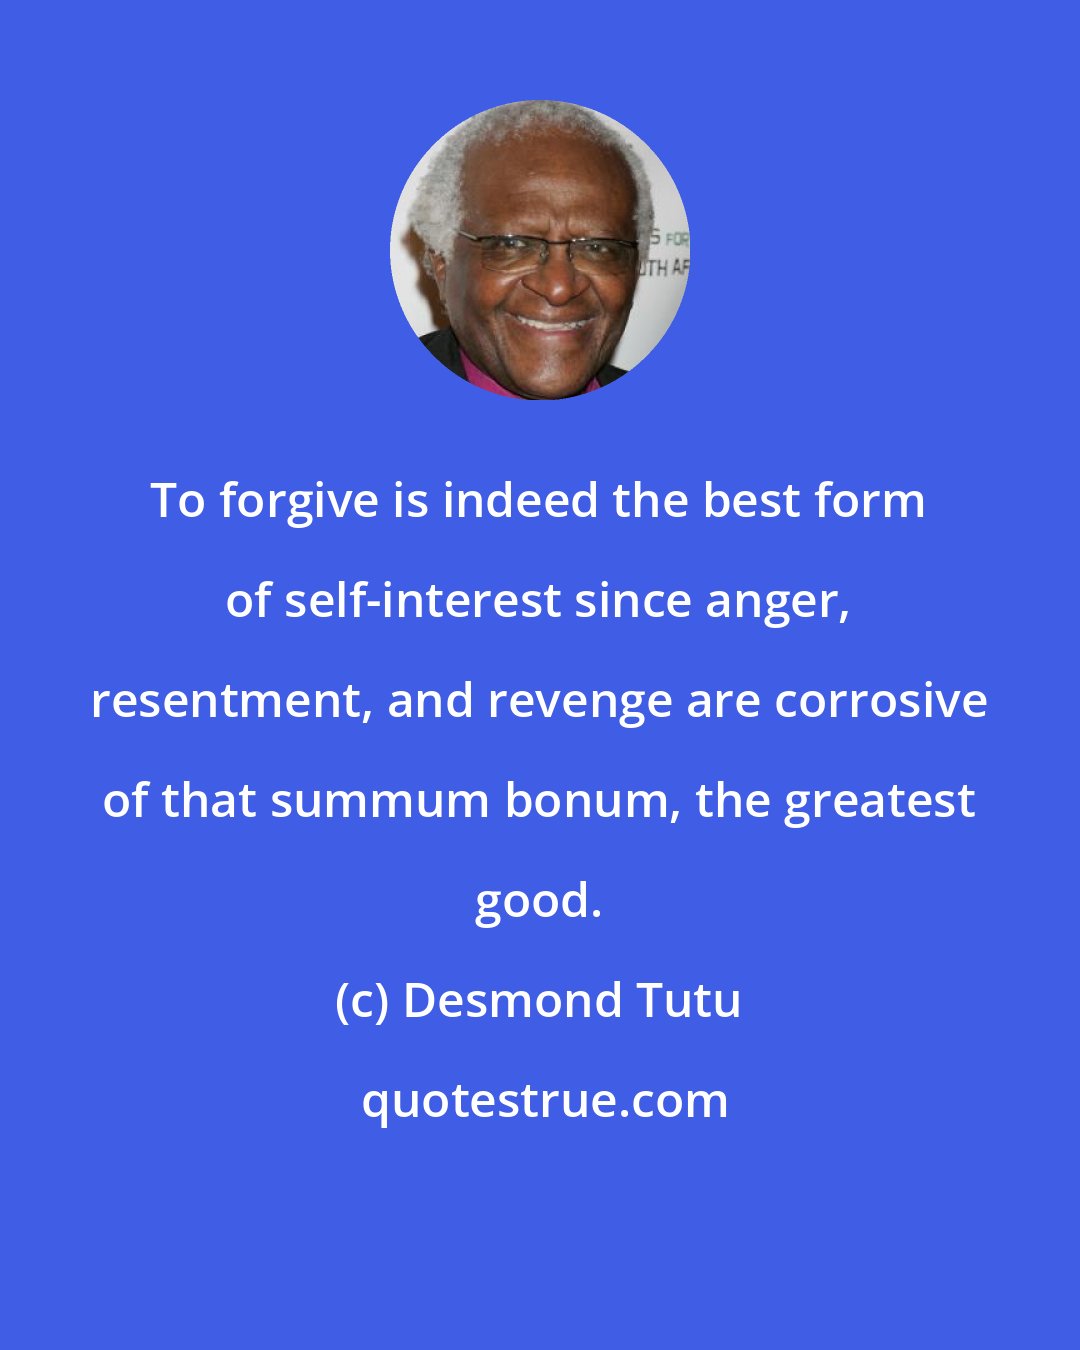 Desmond Tutu: To forgive is indeed the best form of self-interest since anger, resentment, and revenge are corrosive of that summum bonum, the greatest good.